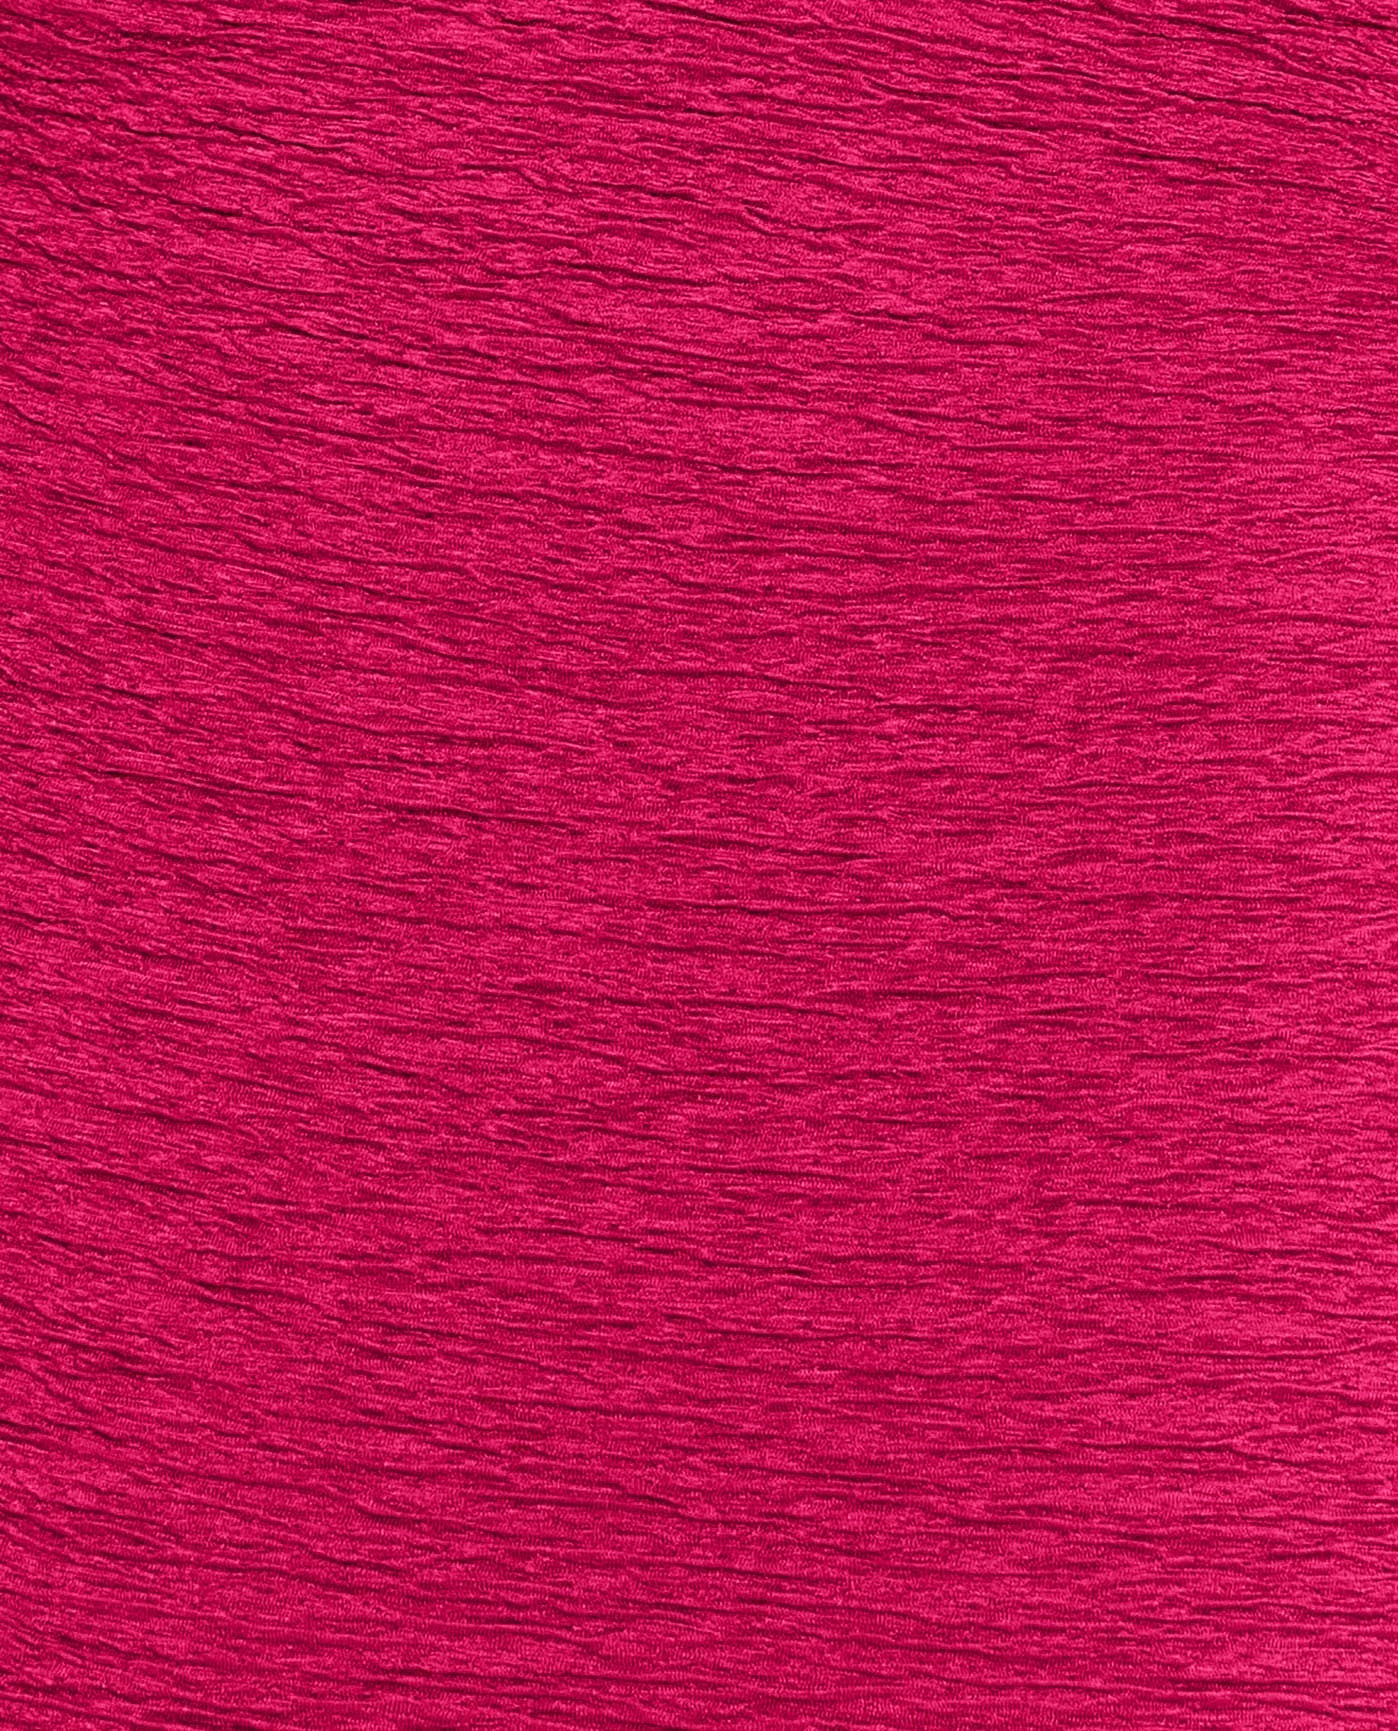 FABRIC SWATCH VIEW OF CHLORINE RESISTANT KRINKLE TEXTURED SOLID X-BACK ONE PIECE | KRINKLE ROSE